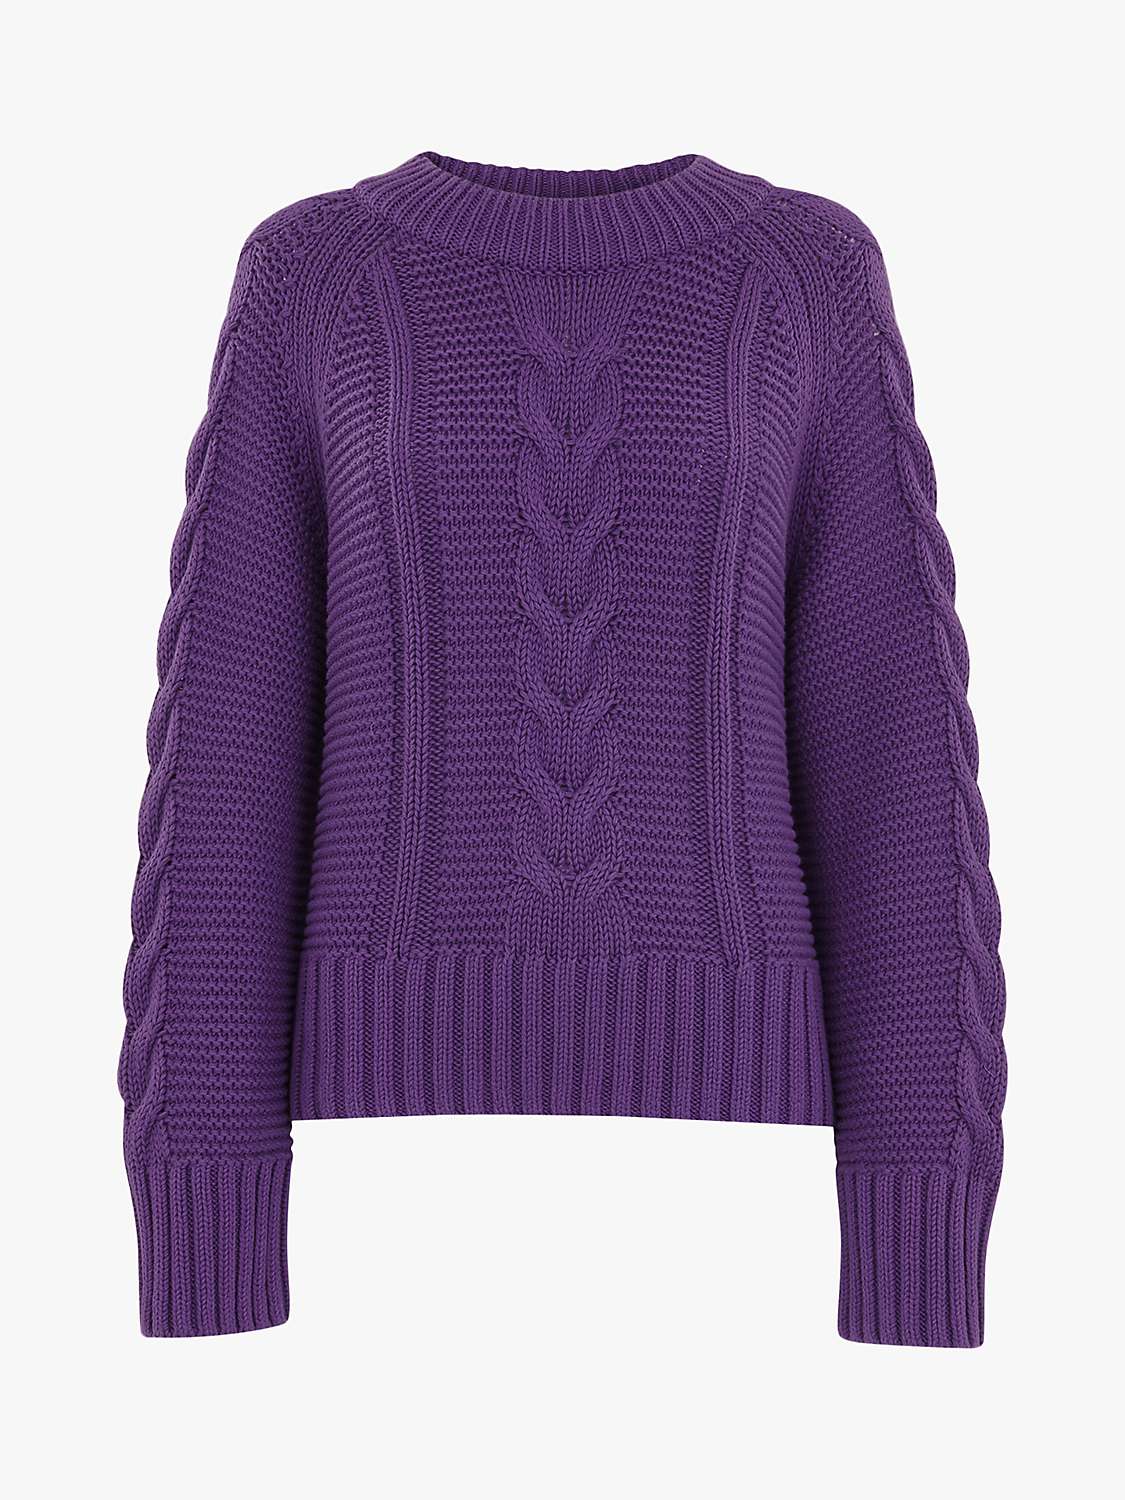 Buy Whistles Cable Knit Jumper, Purple Online at johnlewis.com